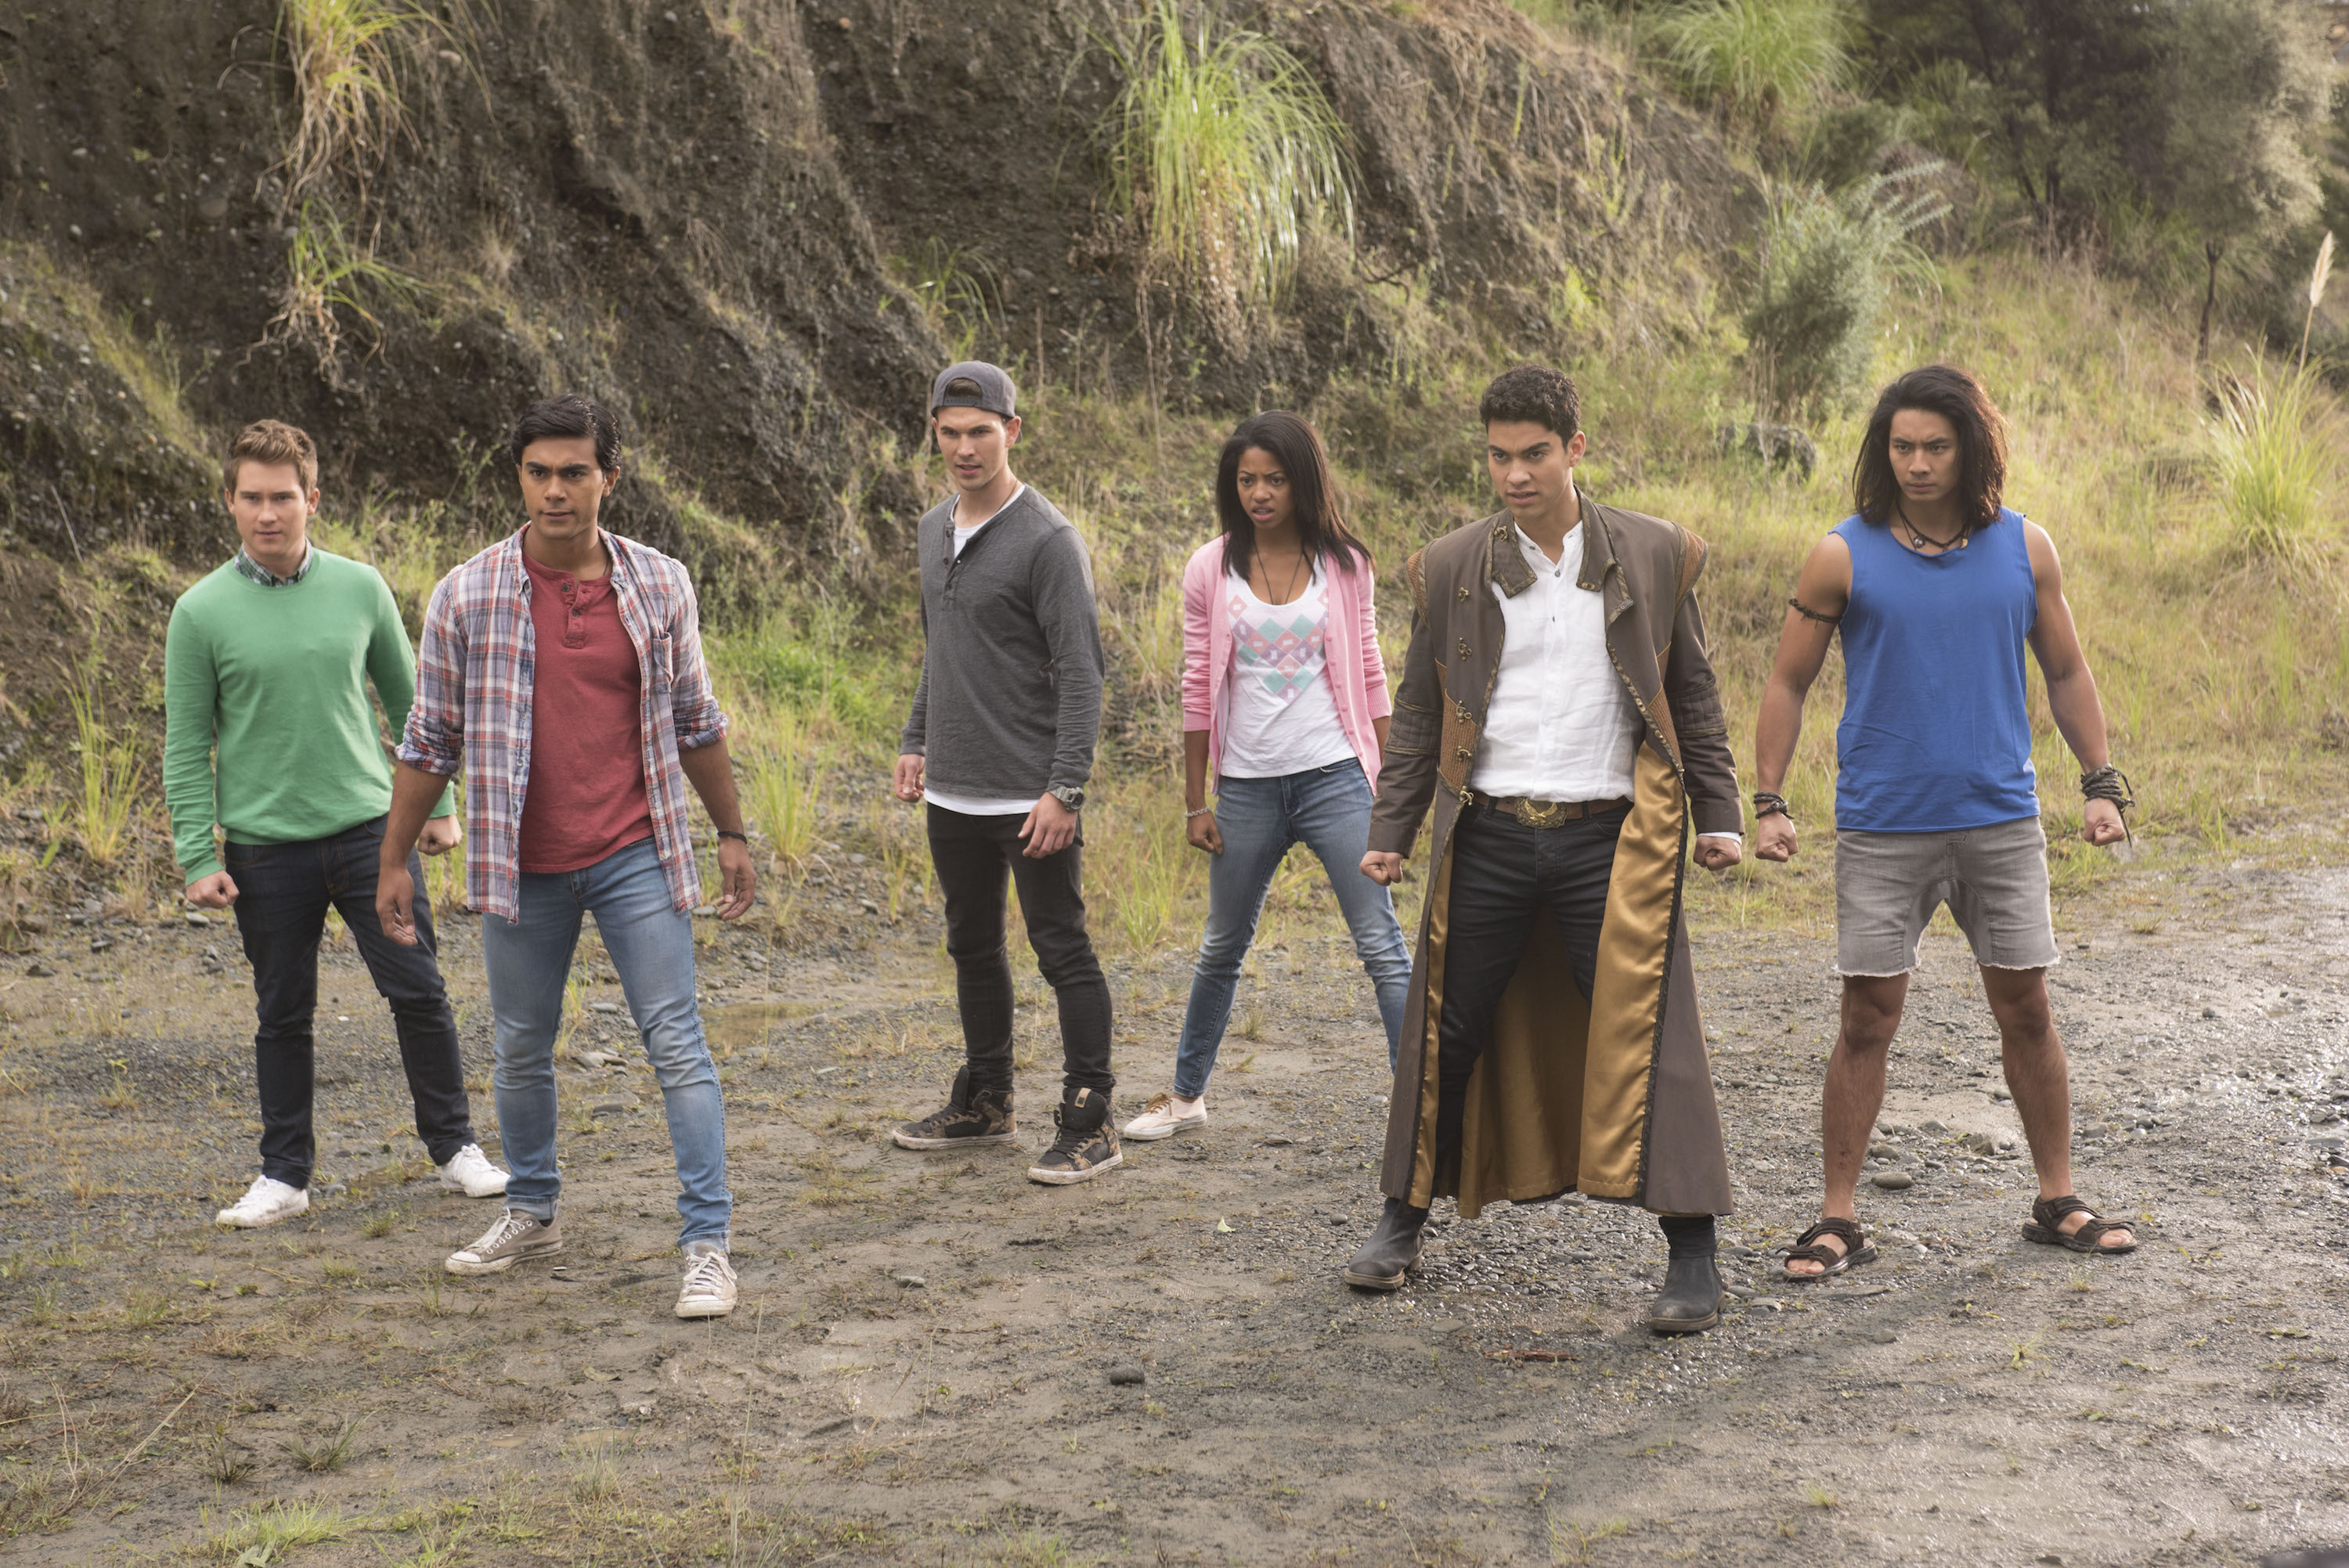 Power Rangers Dino Super Charge episode 14, "Silver Secret" airs ...